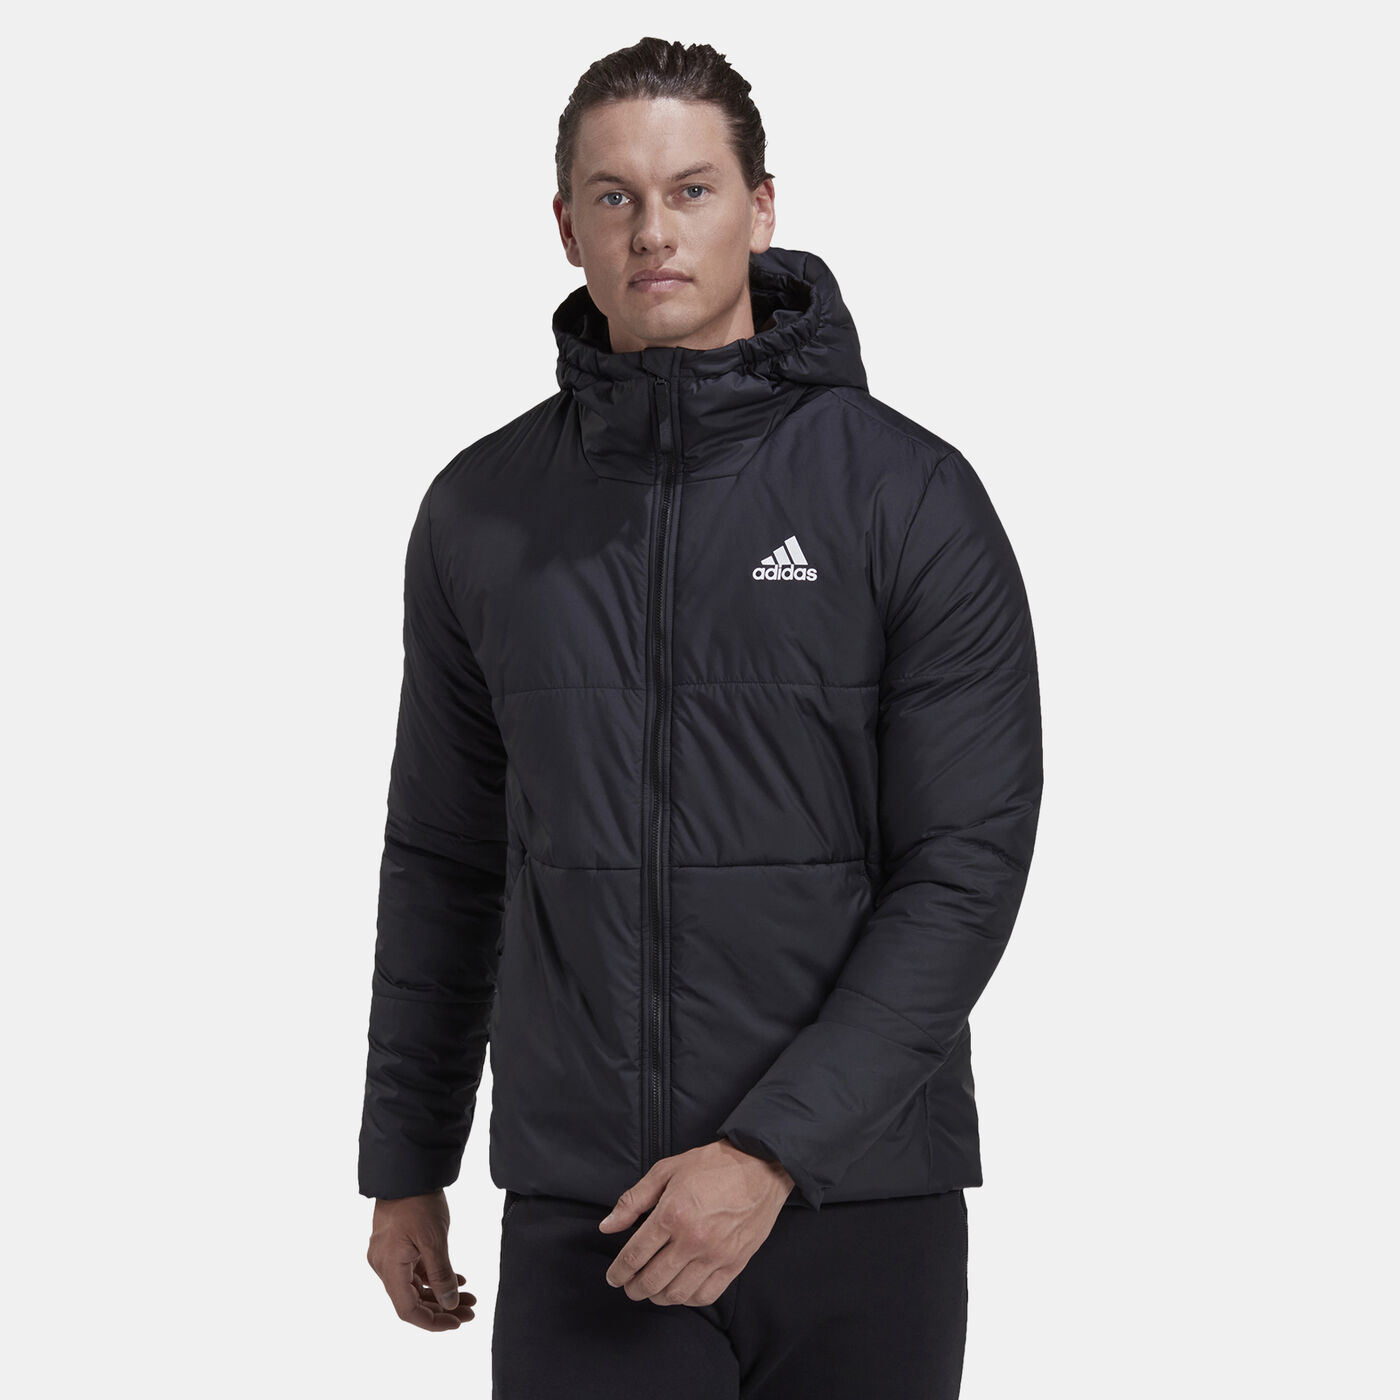 Men's BSC 3-Stripes Hooded Insulated Jacket